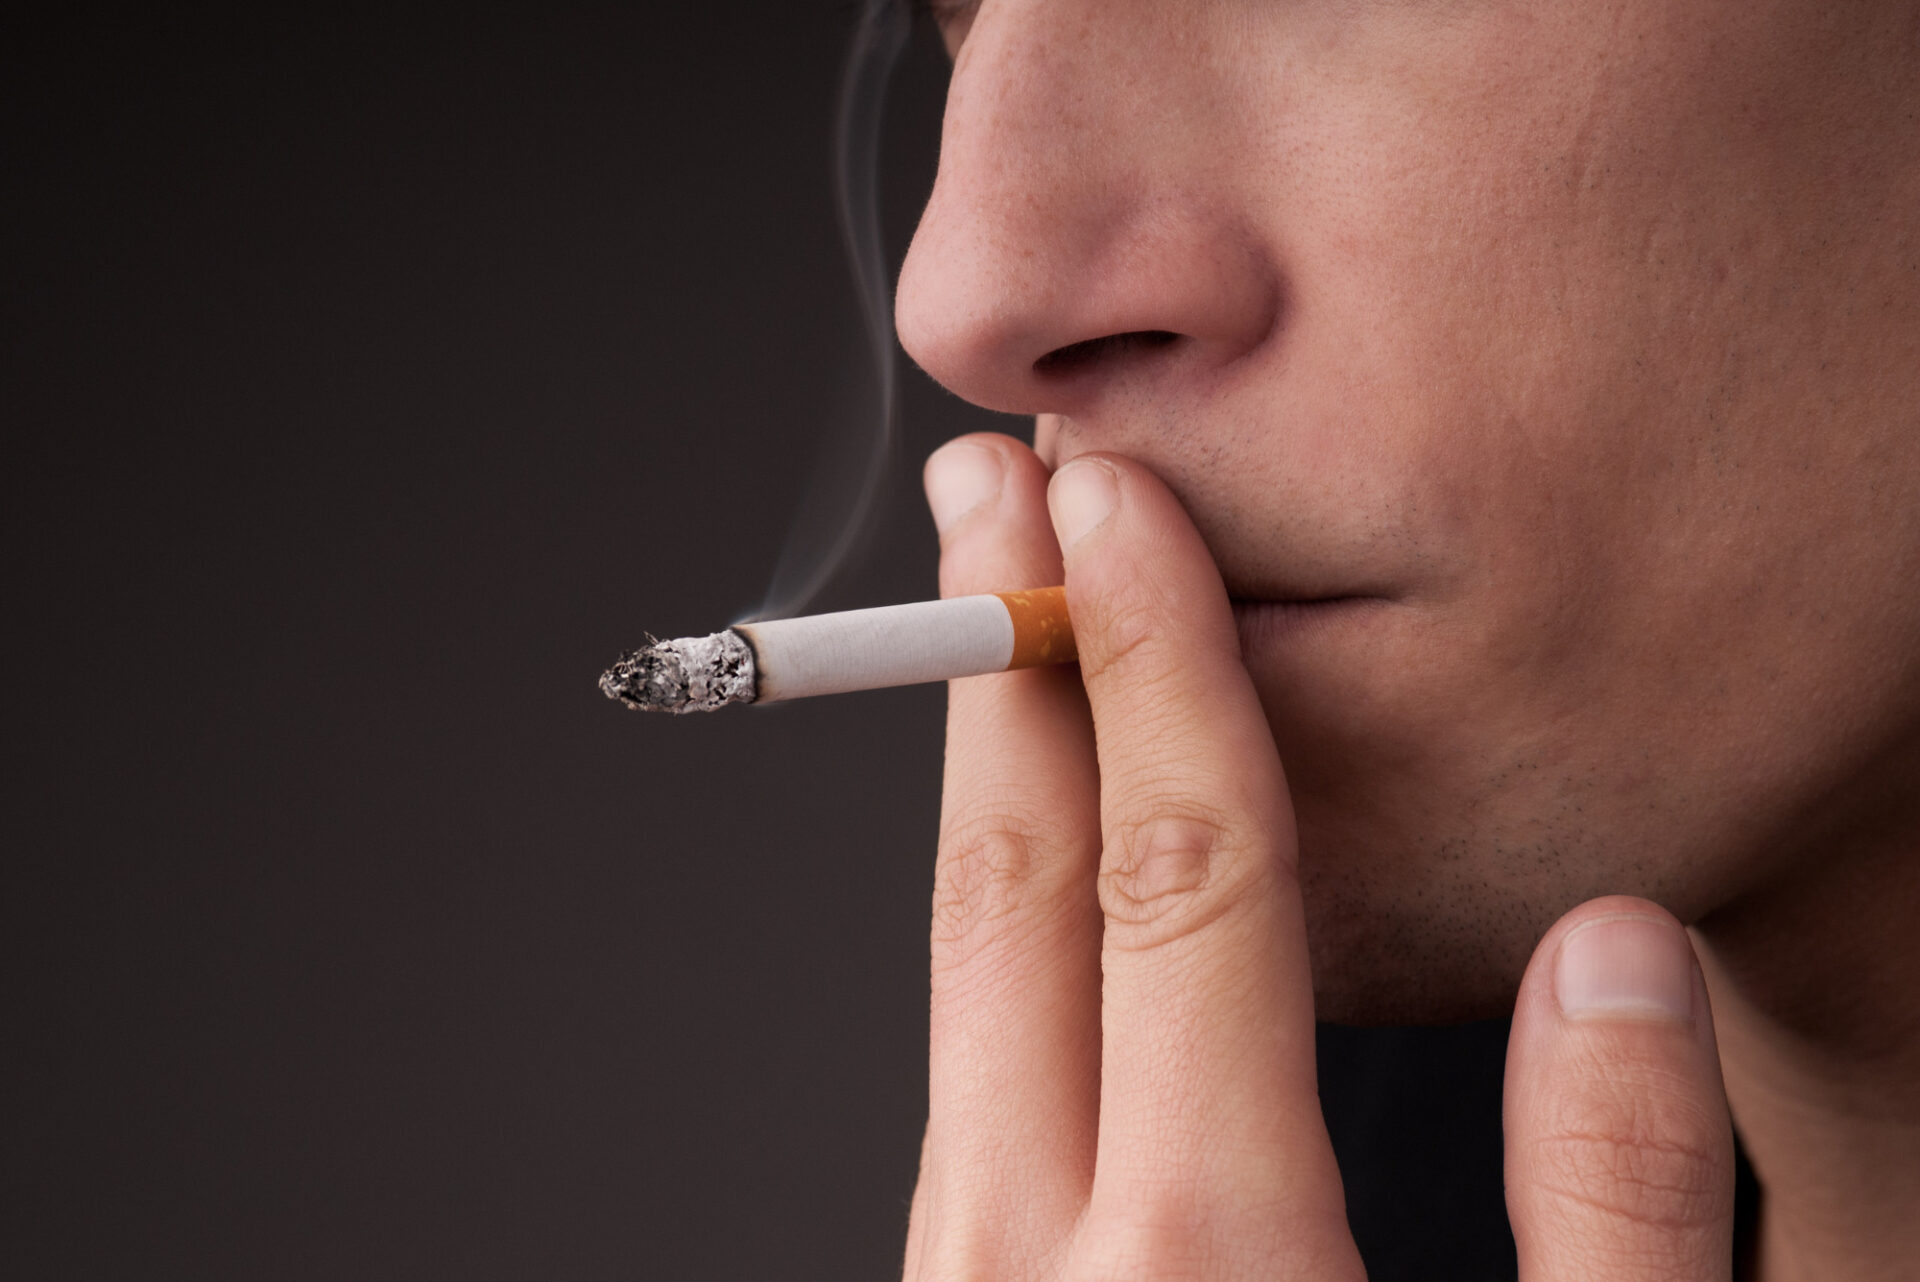 Smoking Is on the Rise: Here’s Why You Should Care